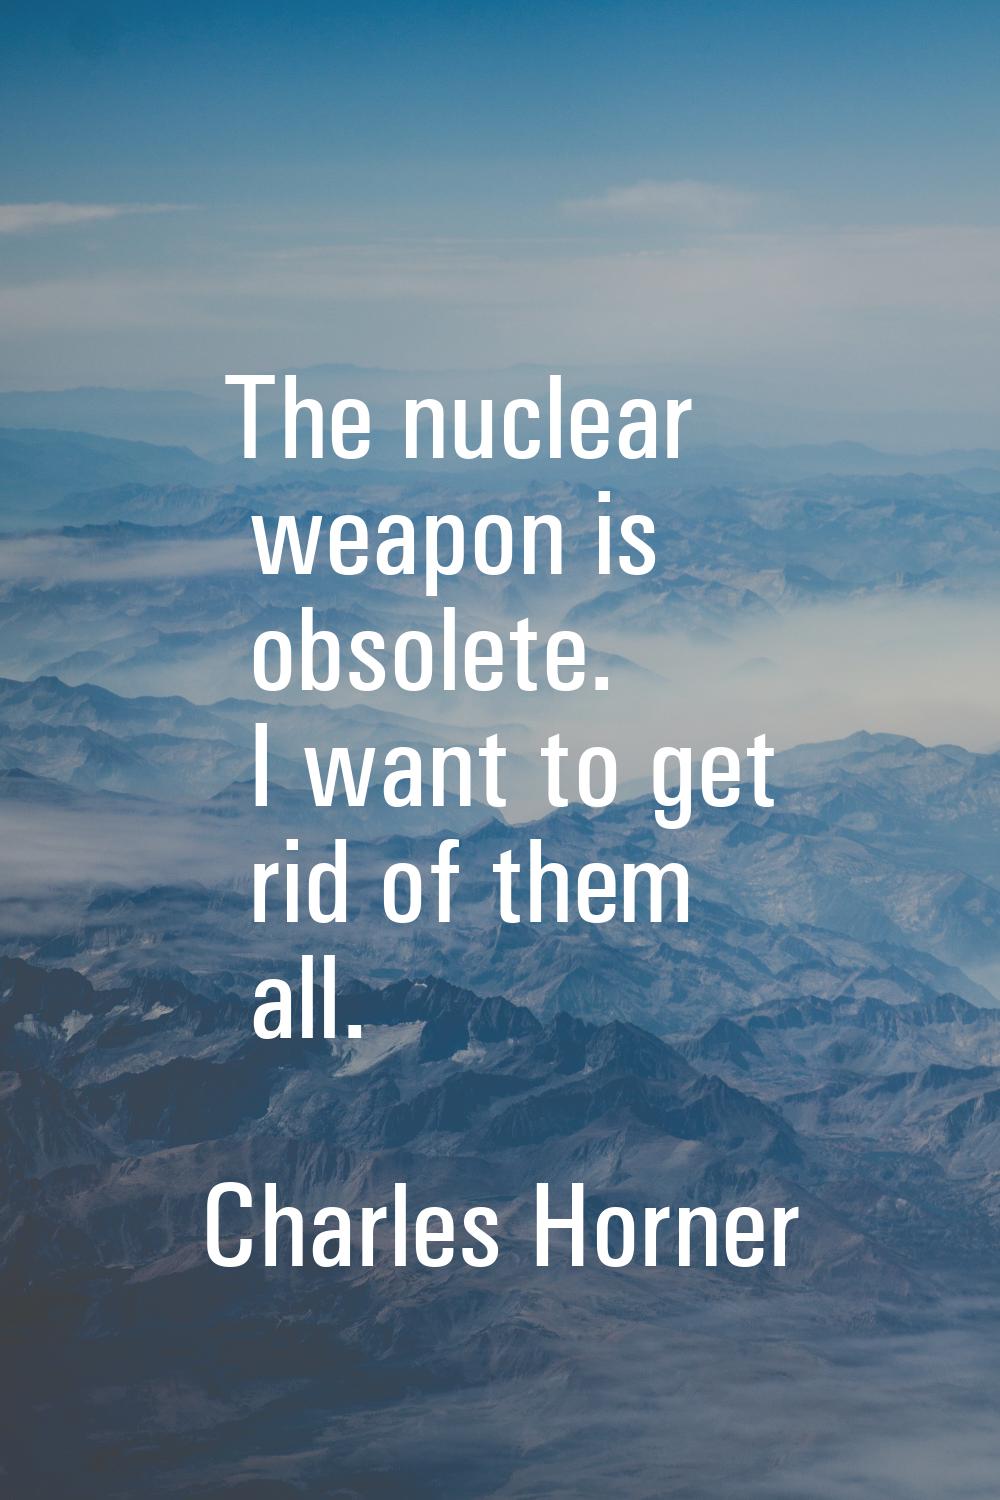 The nuclear weapon is obsolete. I want to get rid of them all.